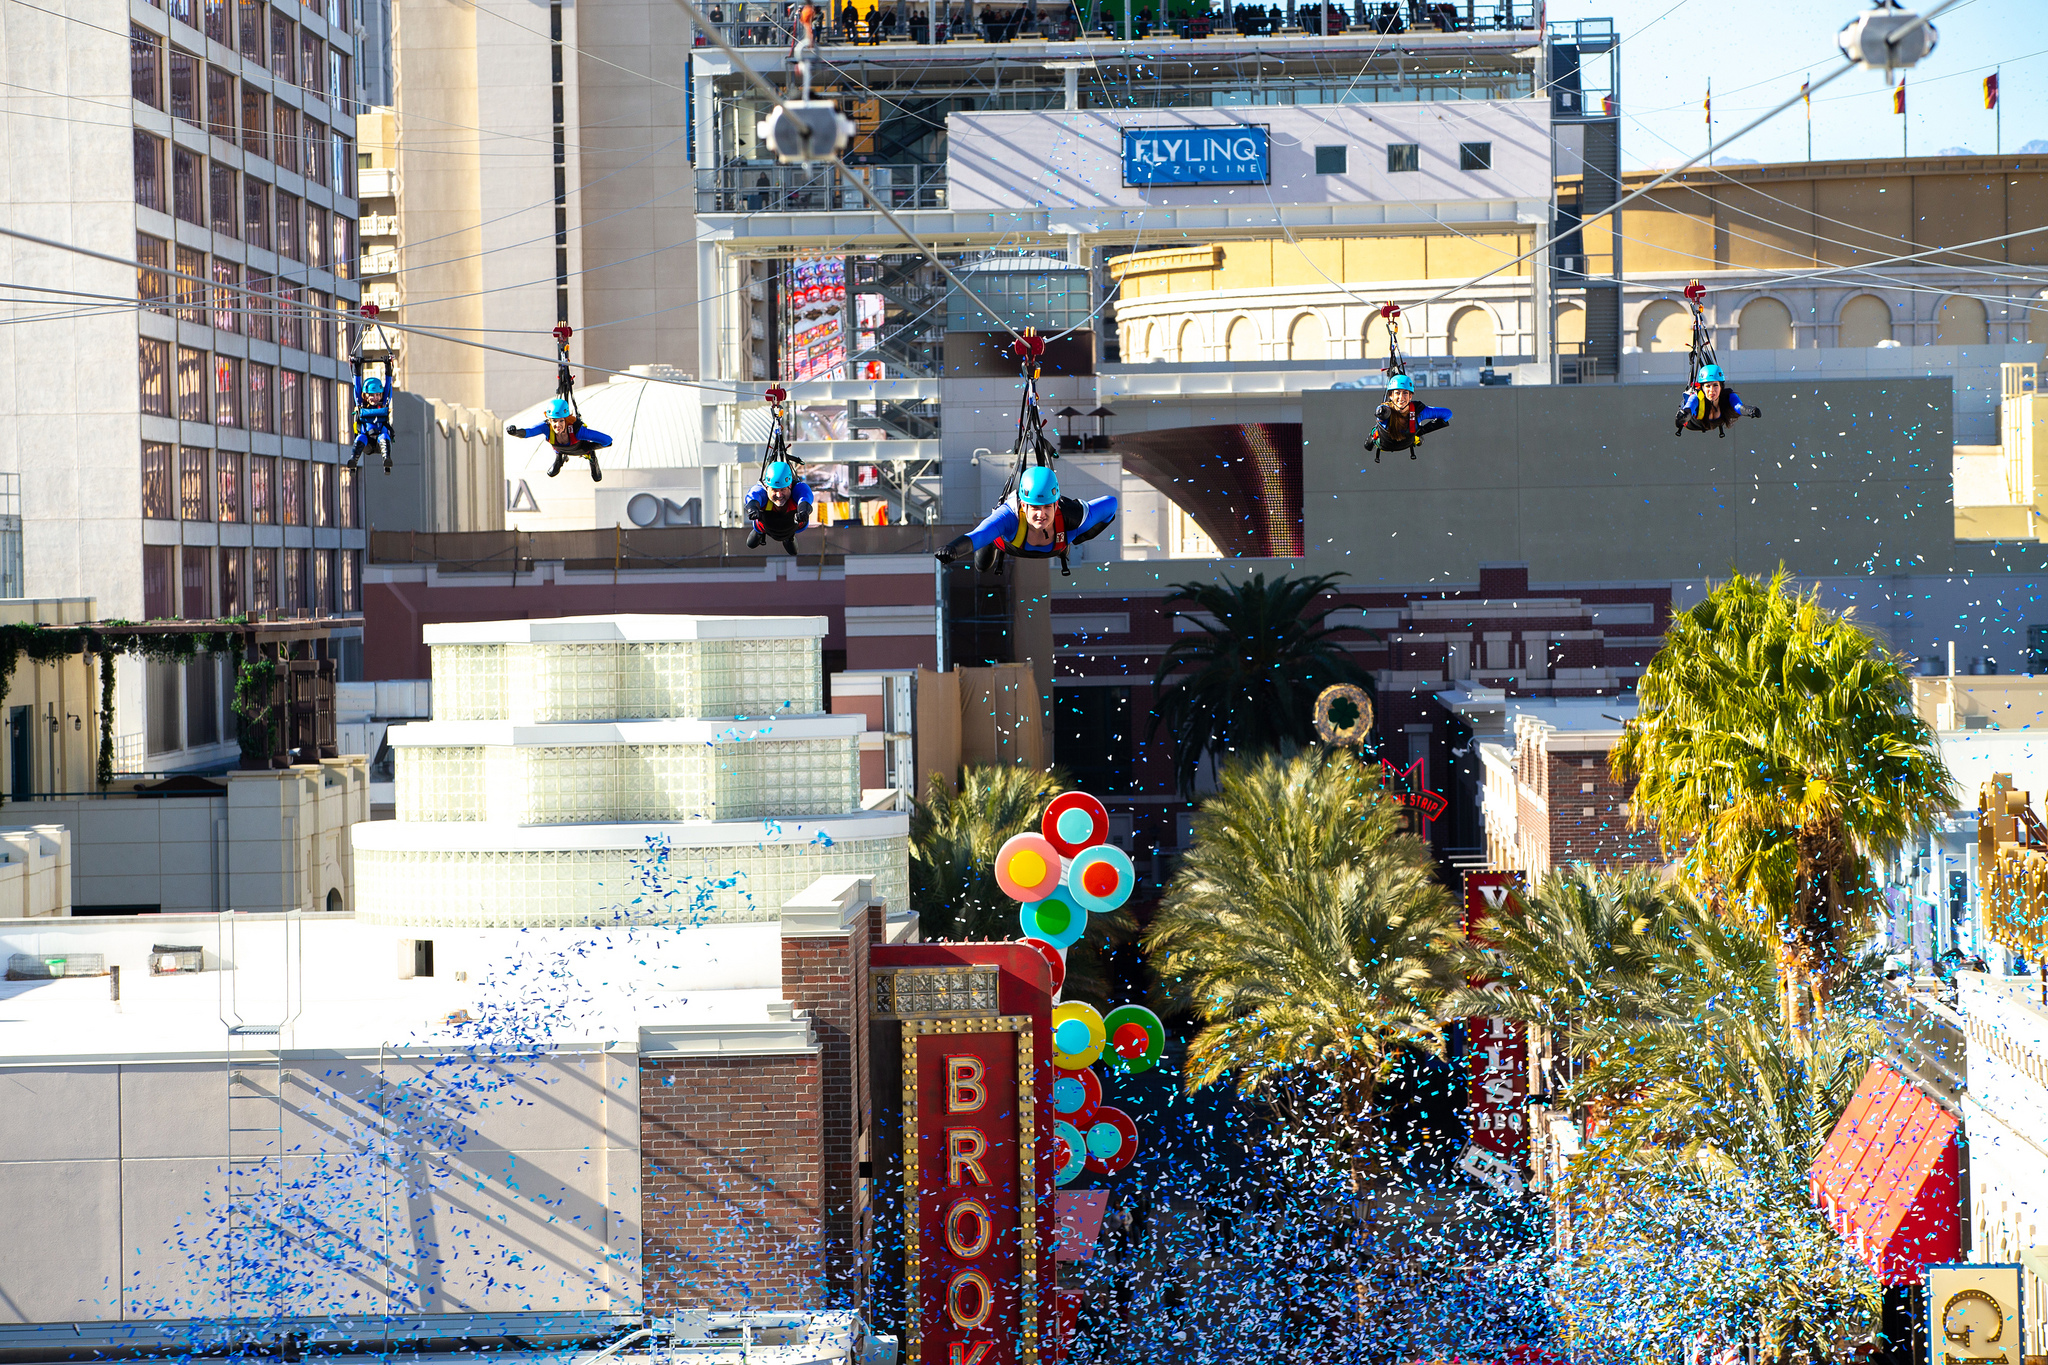 “Superheroes” Become the First to Fly into the New Year at the Brand-New FLY LINQ Zipline in Las Vegas. (Photo Courtesy of FLY LINQ)